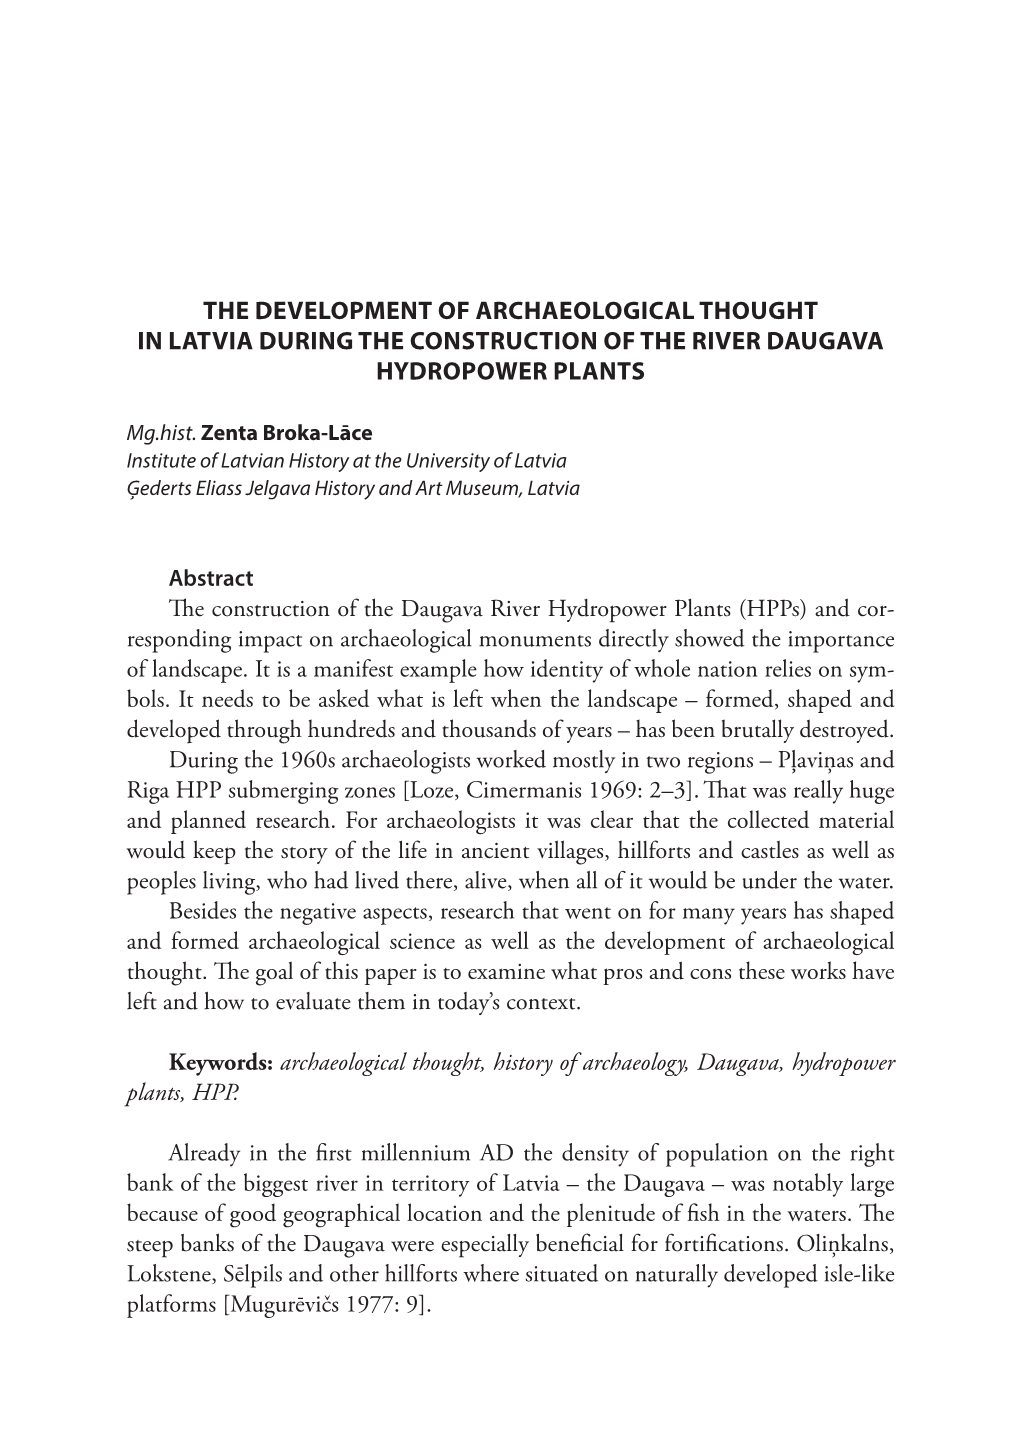 The Development of Archaeological Thought in Latvia During the Construction of the River Daugava Hydropower Plants